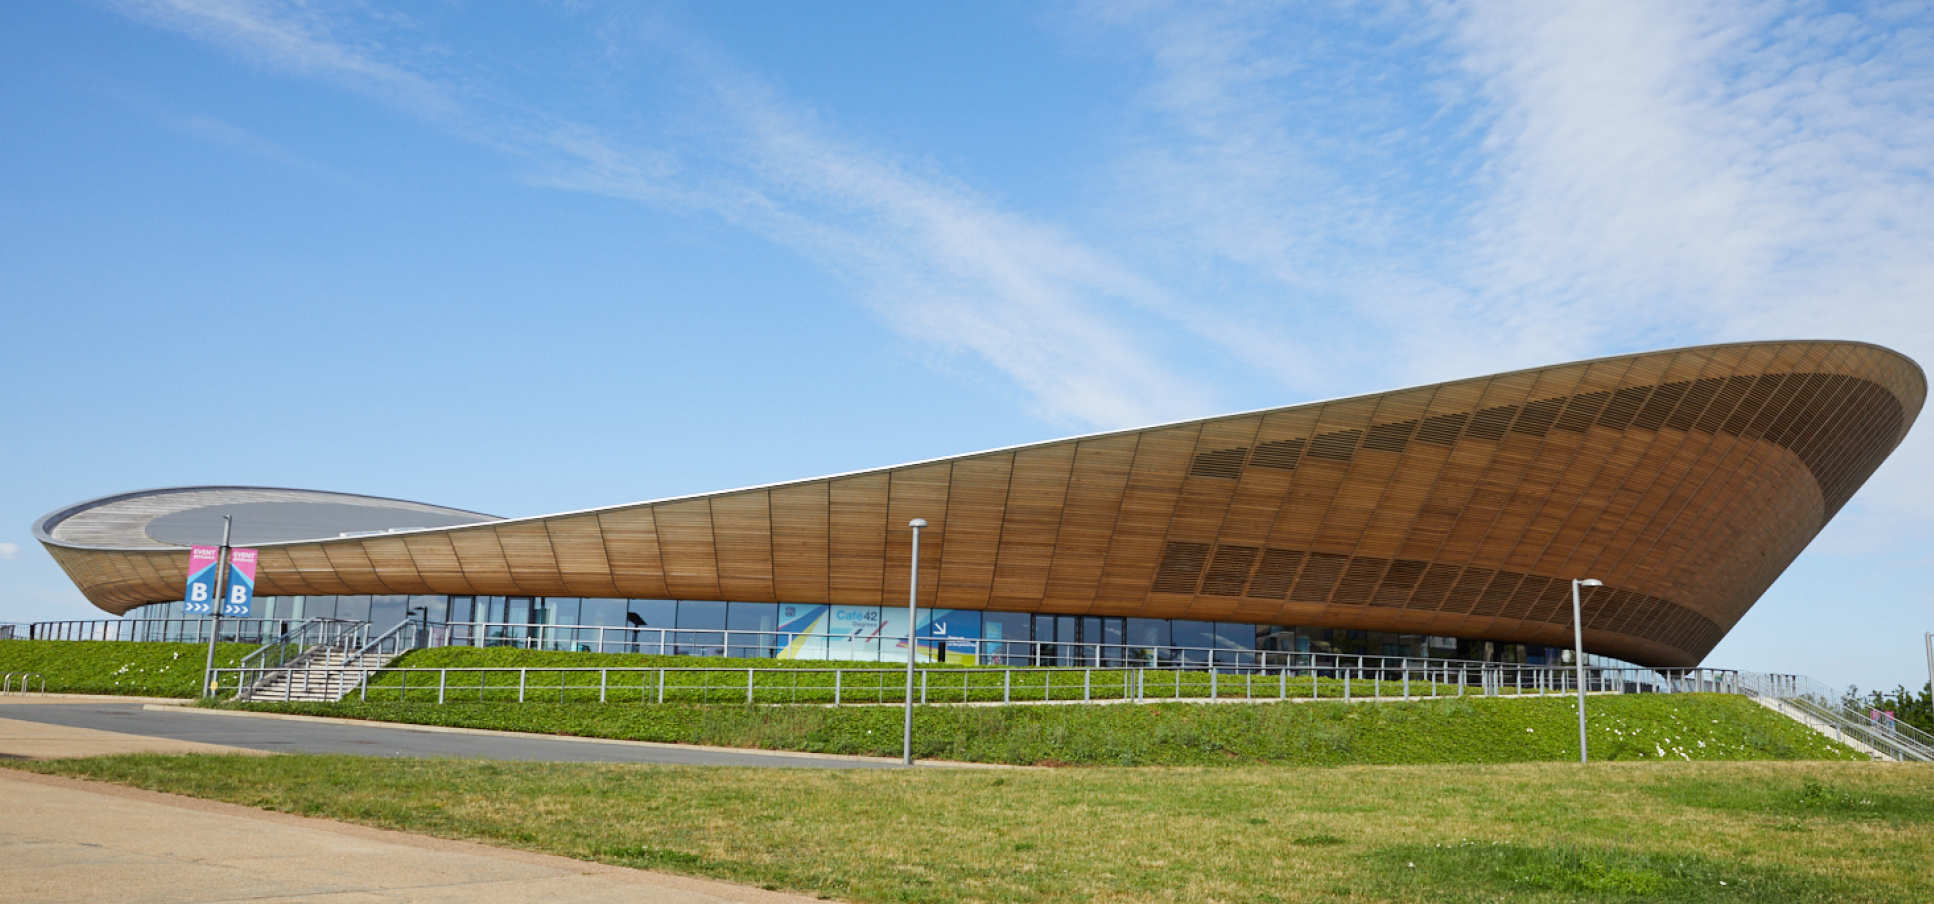 The event was held at the London Velodrome at the Olympic Park